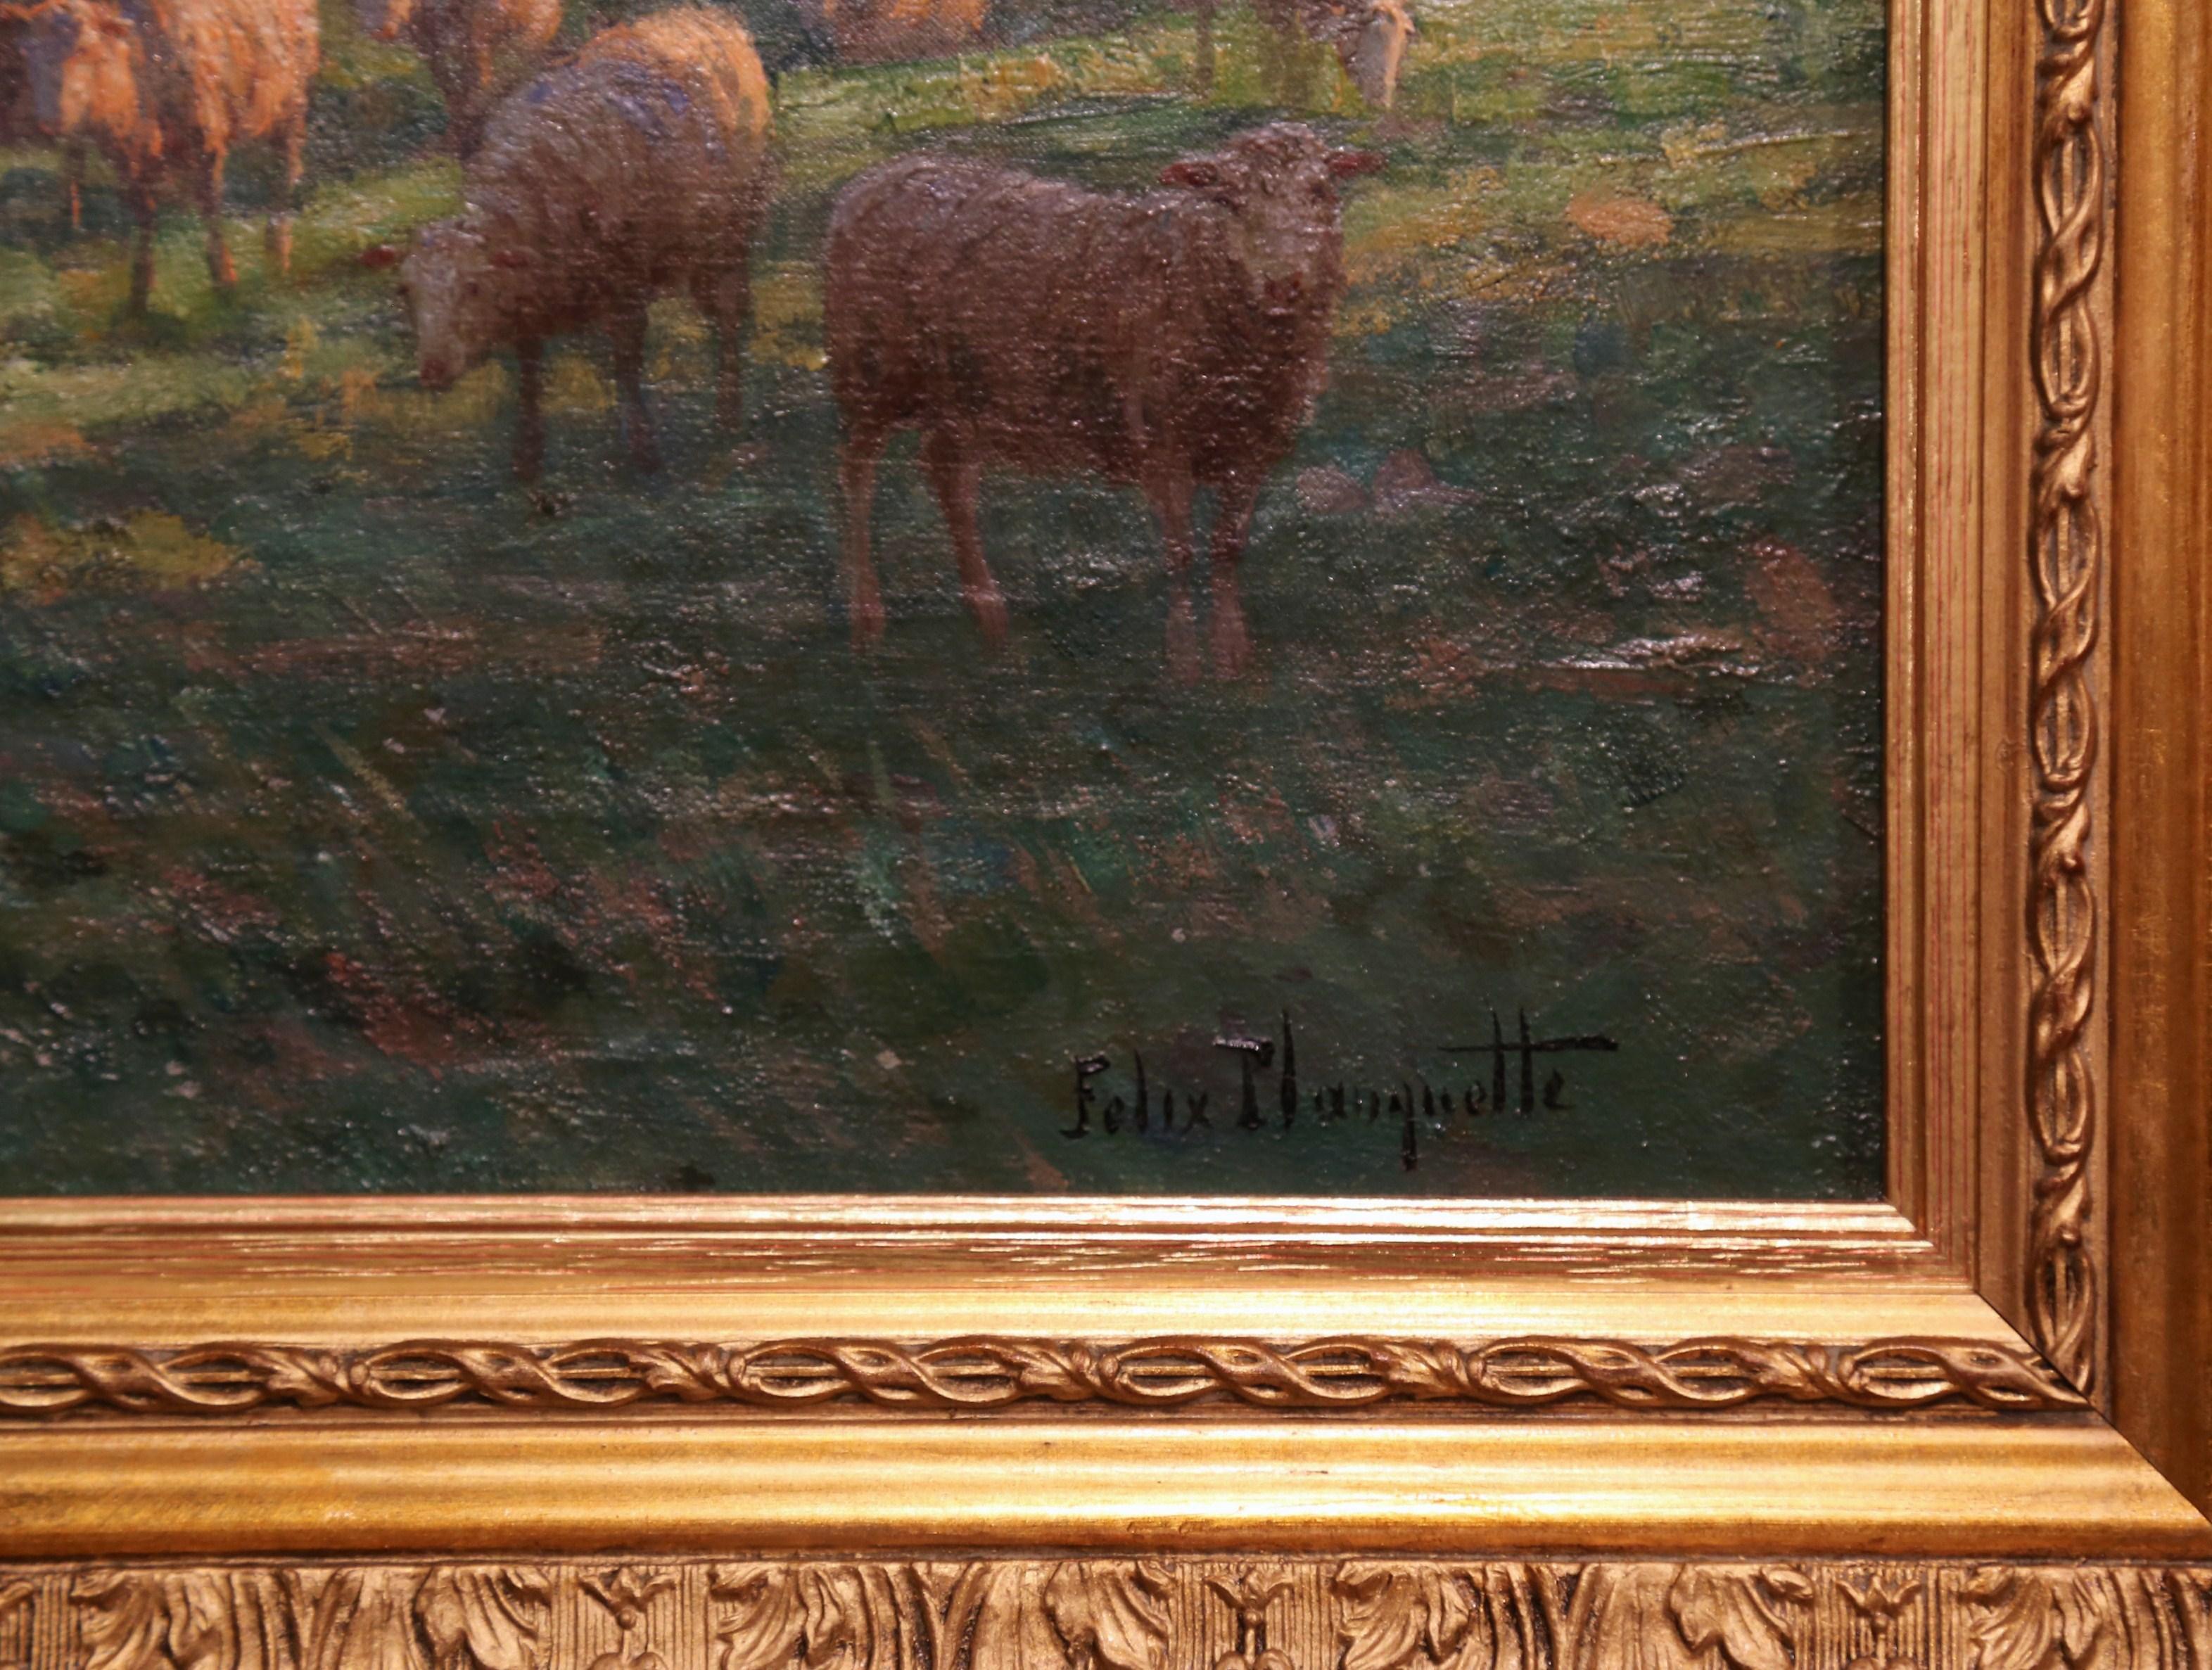 Early 20th Century Sheep Painting in Gilt Wood Frame Signed Felix Planquette 4